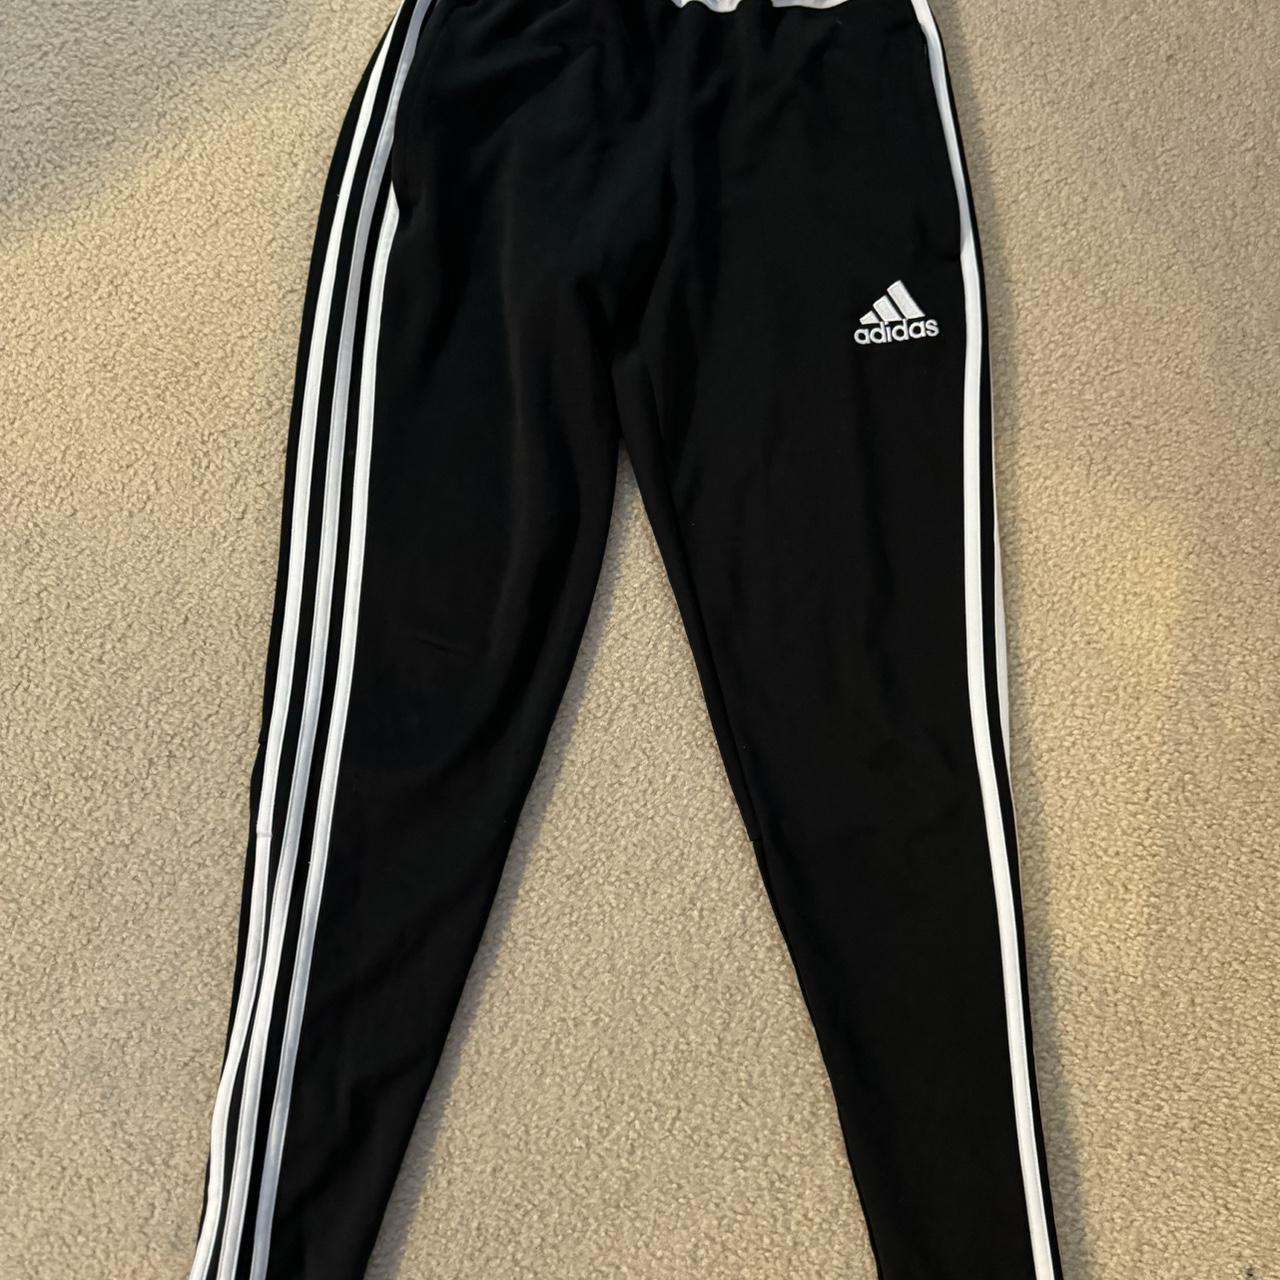 Adidas track pants in size S. Black climacool track... - Depop